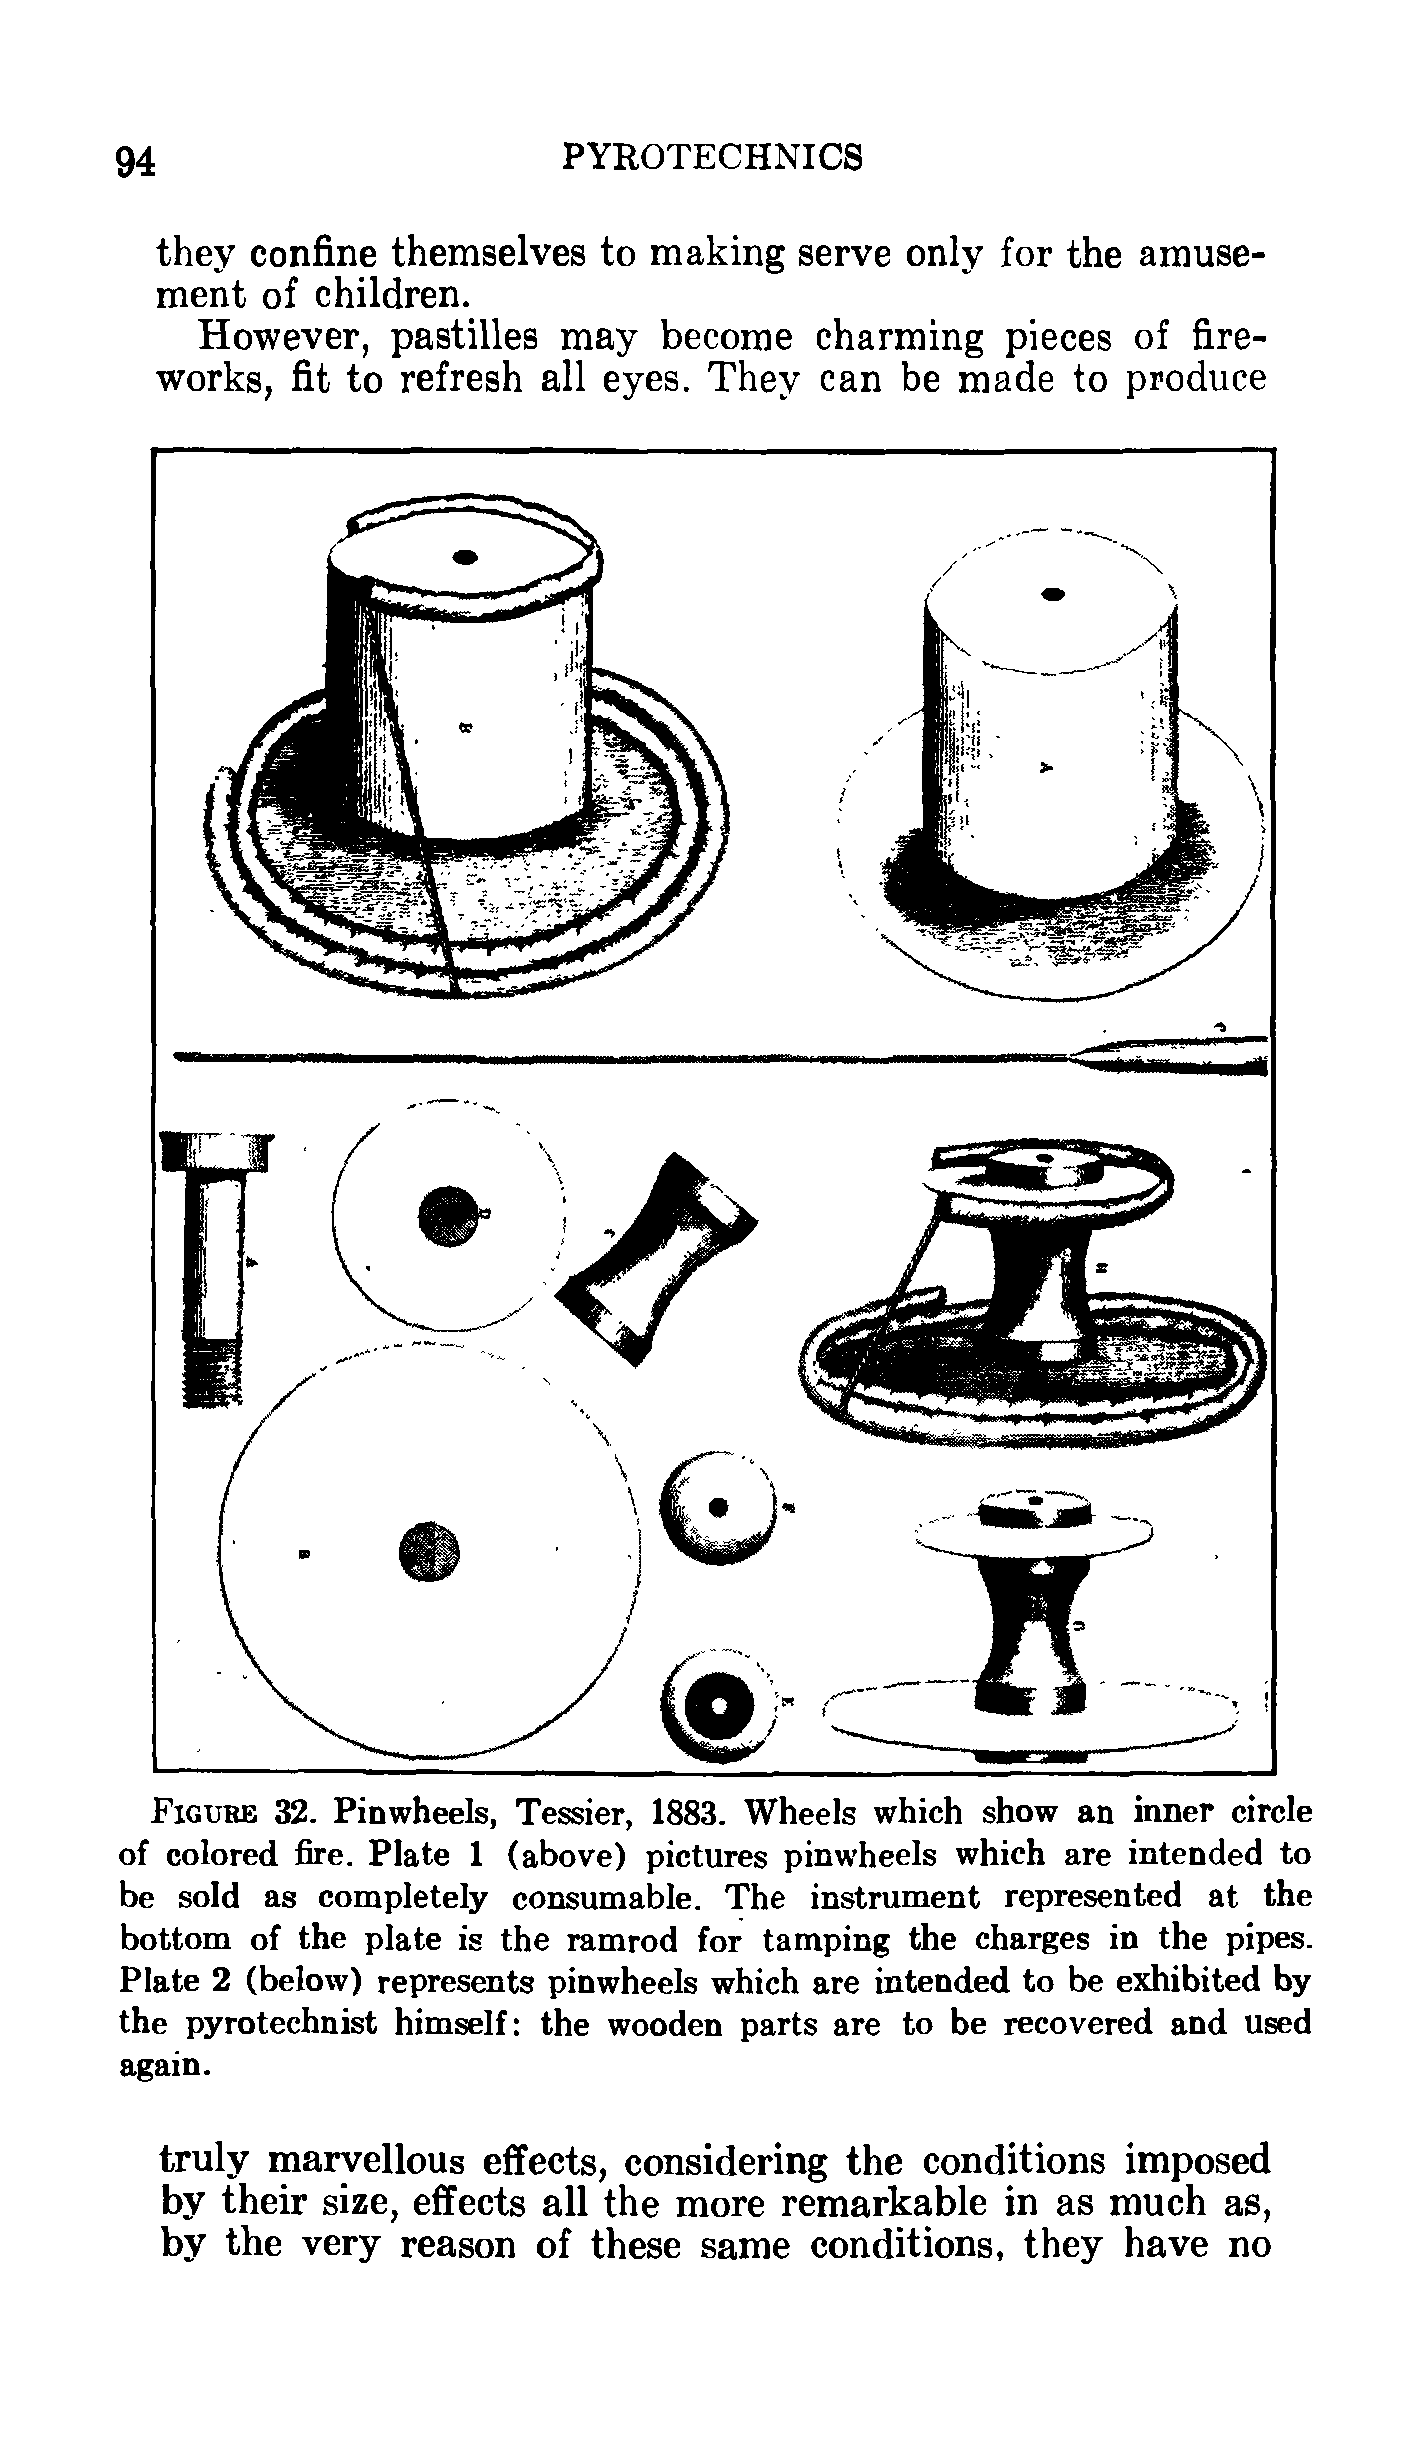 Figure 32. Pinwheels, Tessier, 1883. Wheels which show an inner circle of colored fire. Plate 1 (above) pictures pinwheels which are intended to be sold as completely consumable. The instrument represented at the bottom of the plate is the ramrod for tamping the charges in the pipes. Plate 2 (below) represents pinwheels which are intended to be exhibited by the pyrotechnist himself the wooden parts are to be recovered and used again.